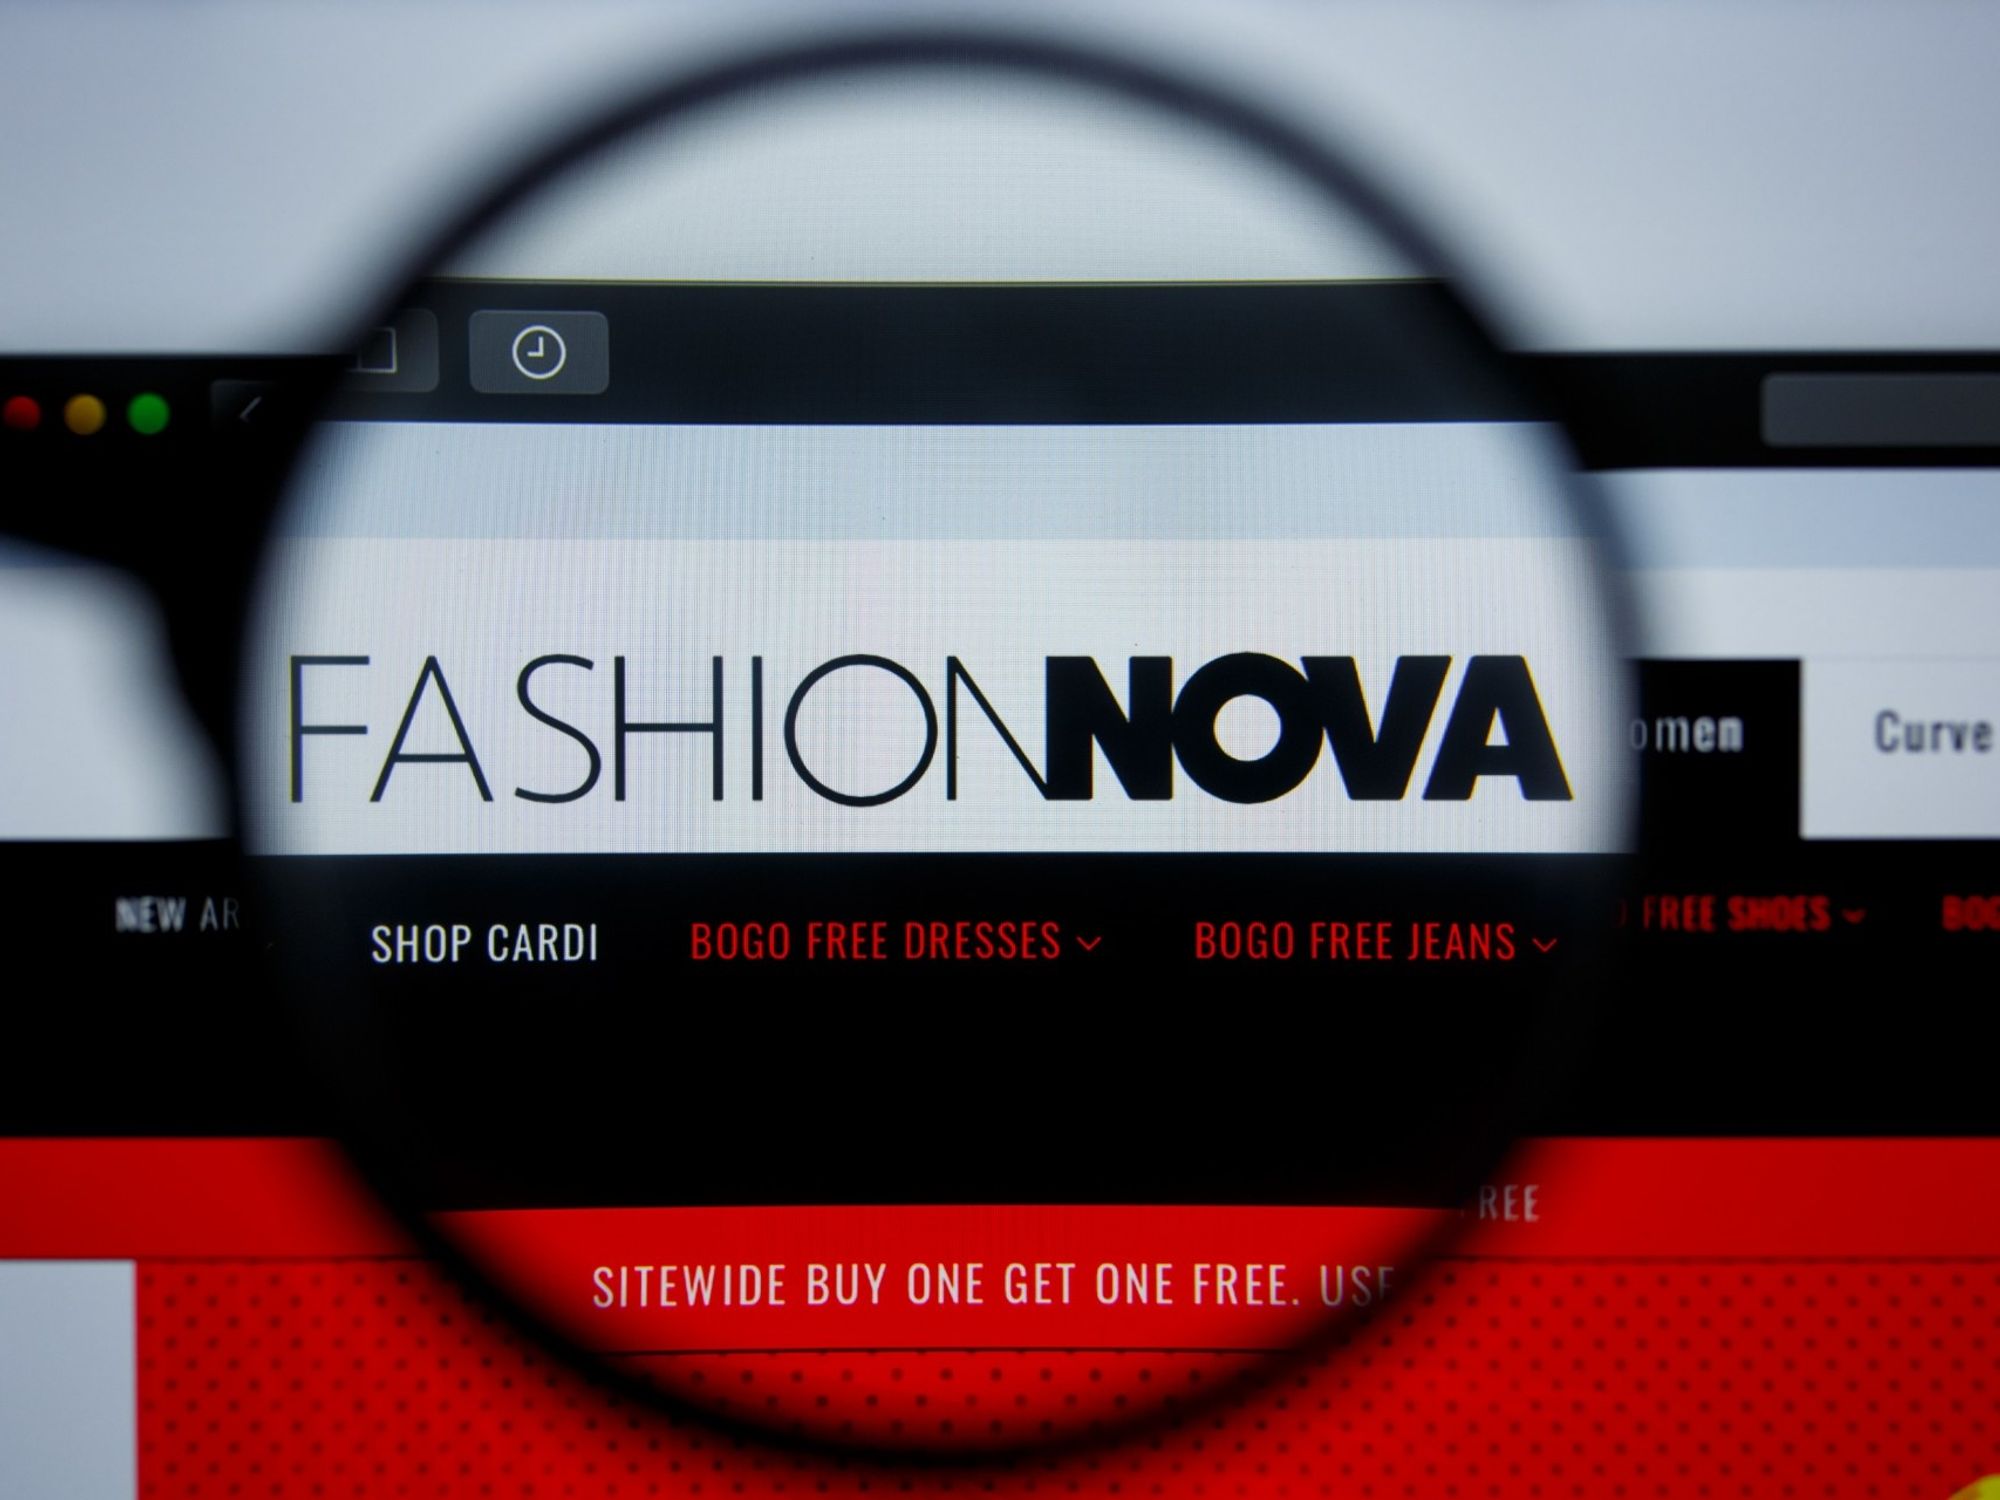 Fashion Nova Pays FTC $9.3M for Illegal Gift Cards, Slow Delivery